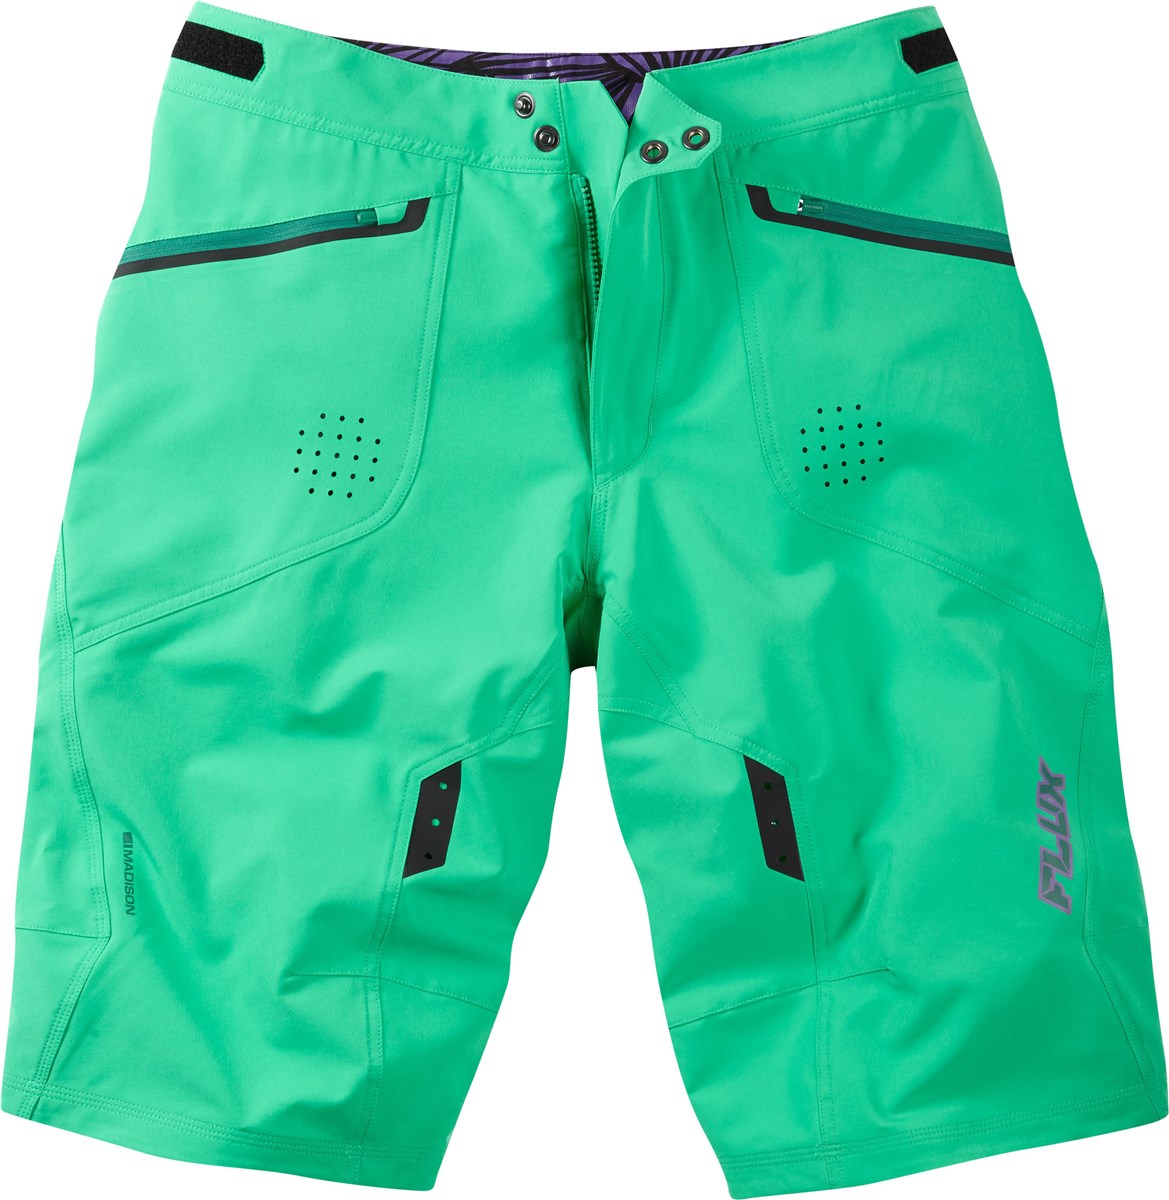 Madison Flux Baggy Cycling Shorts